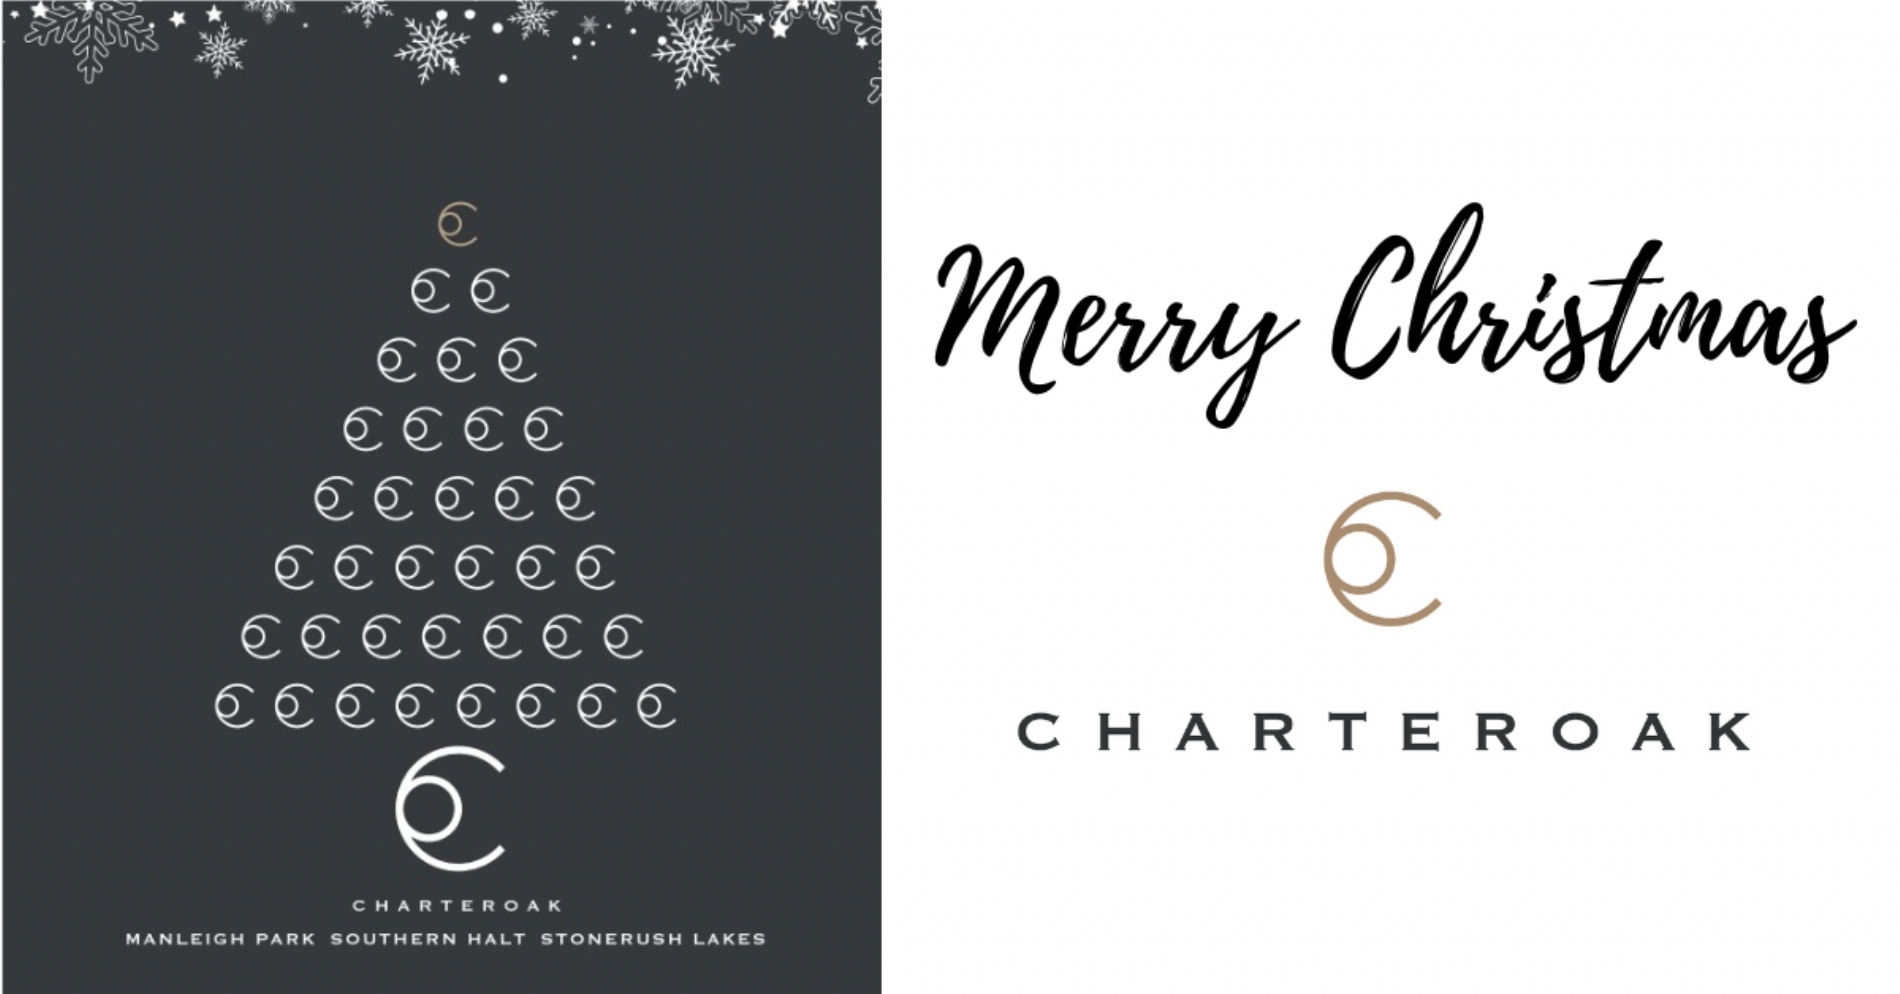 Merry Christmas from the Charteroak team!